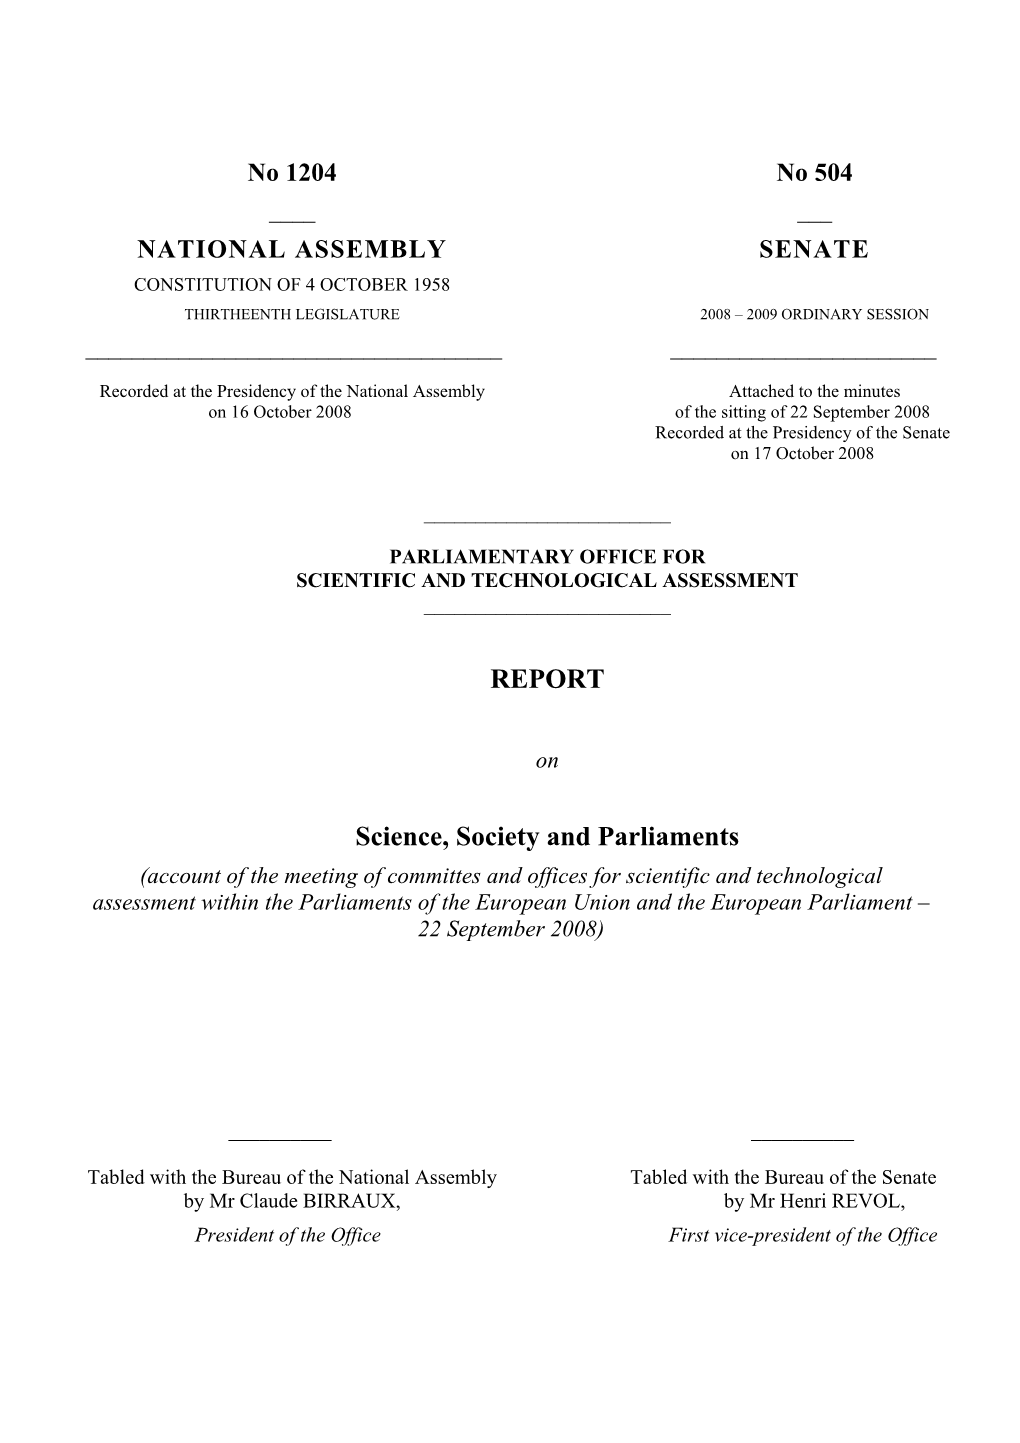 REPORT Science, Society and Parliaments